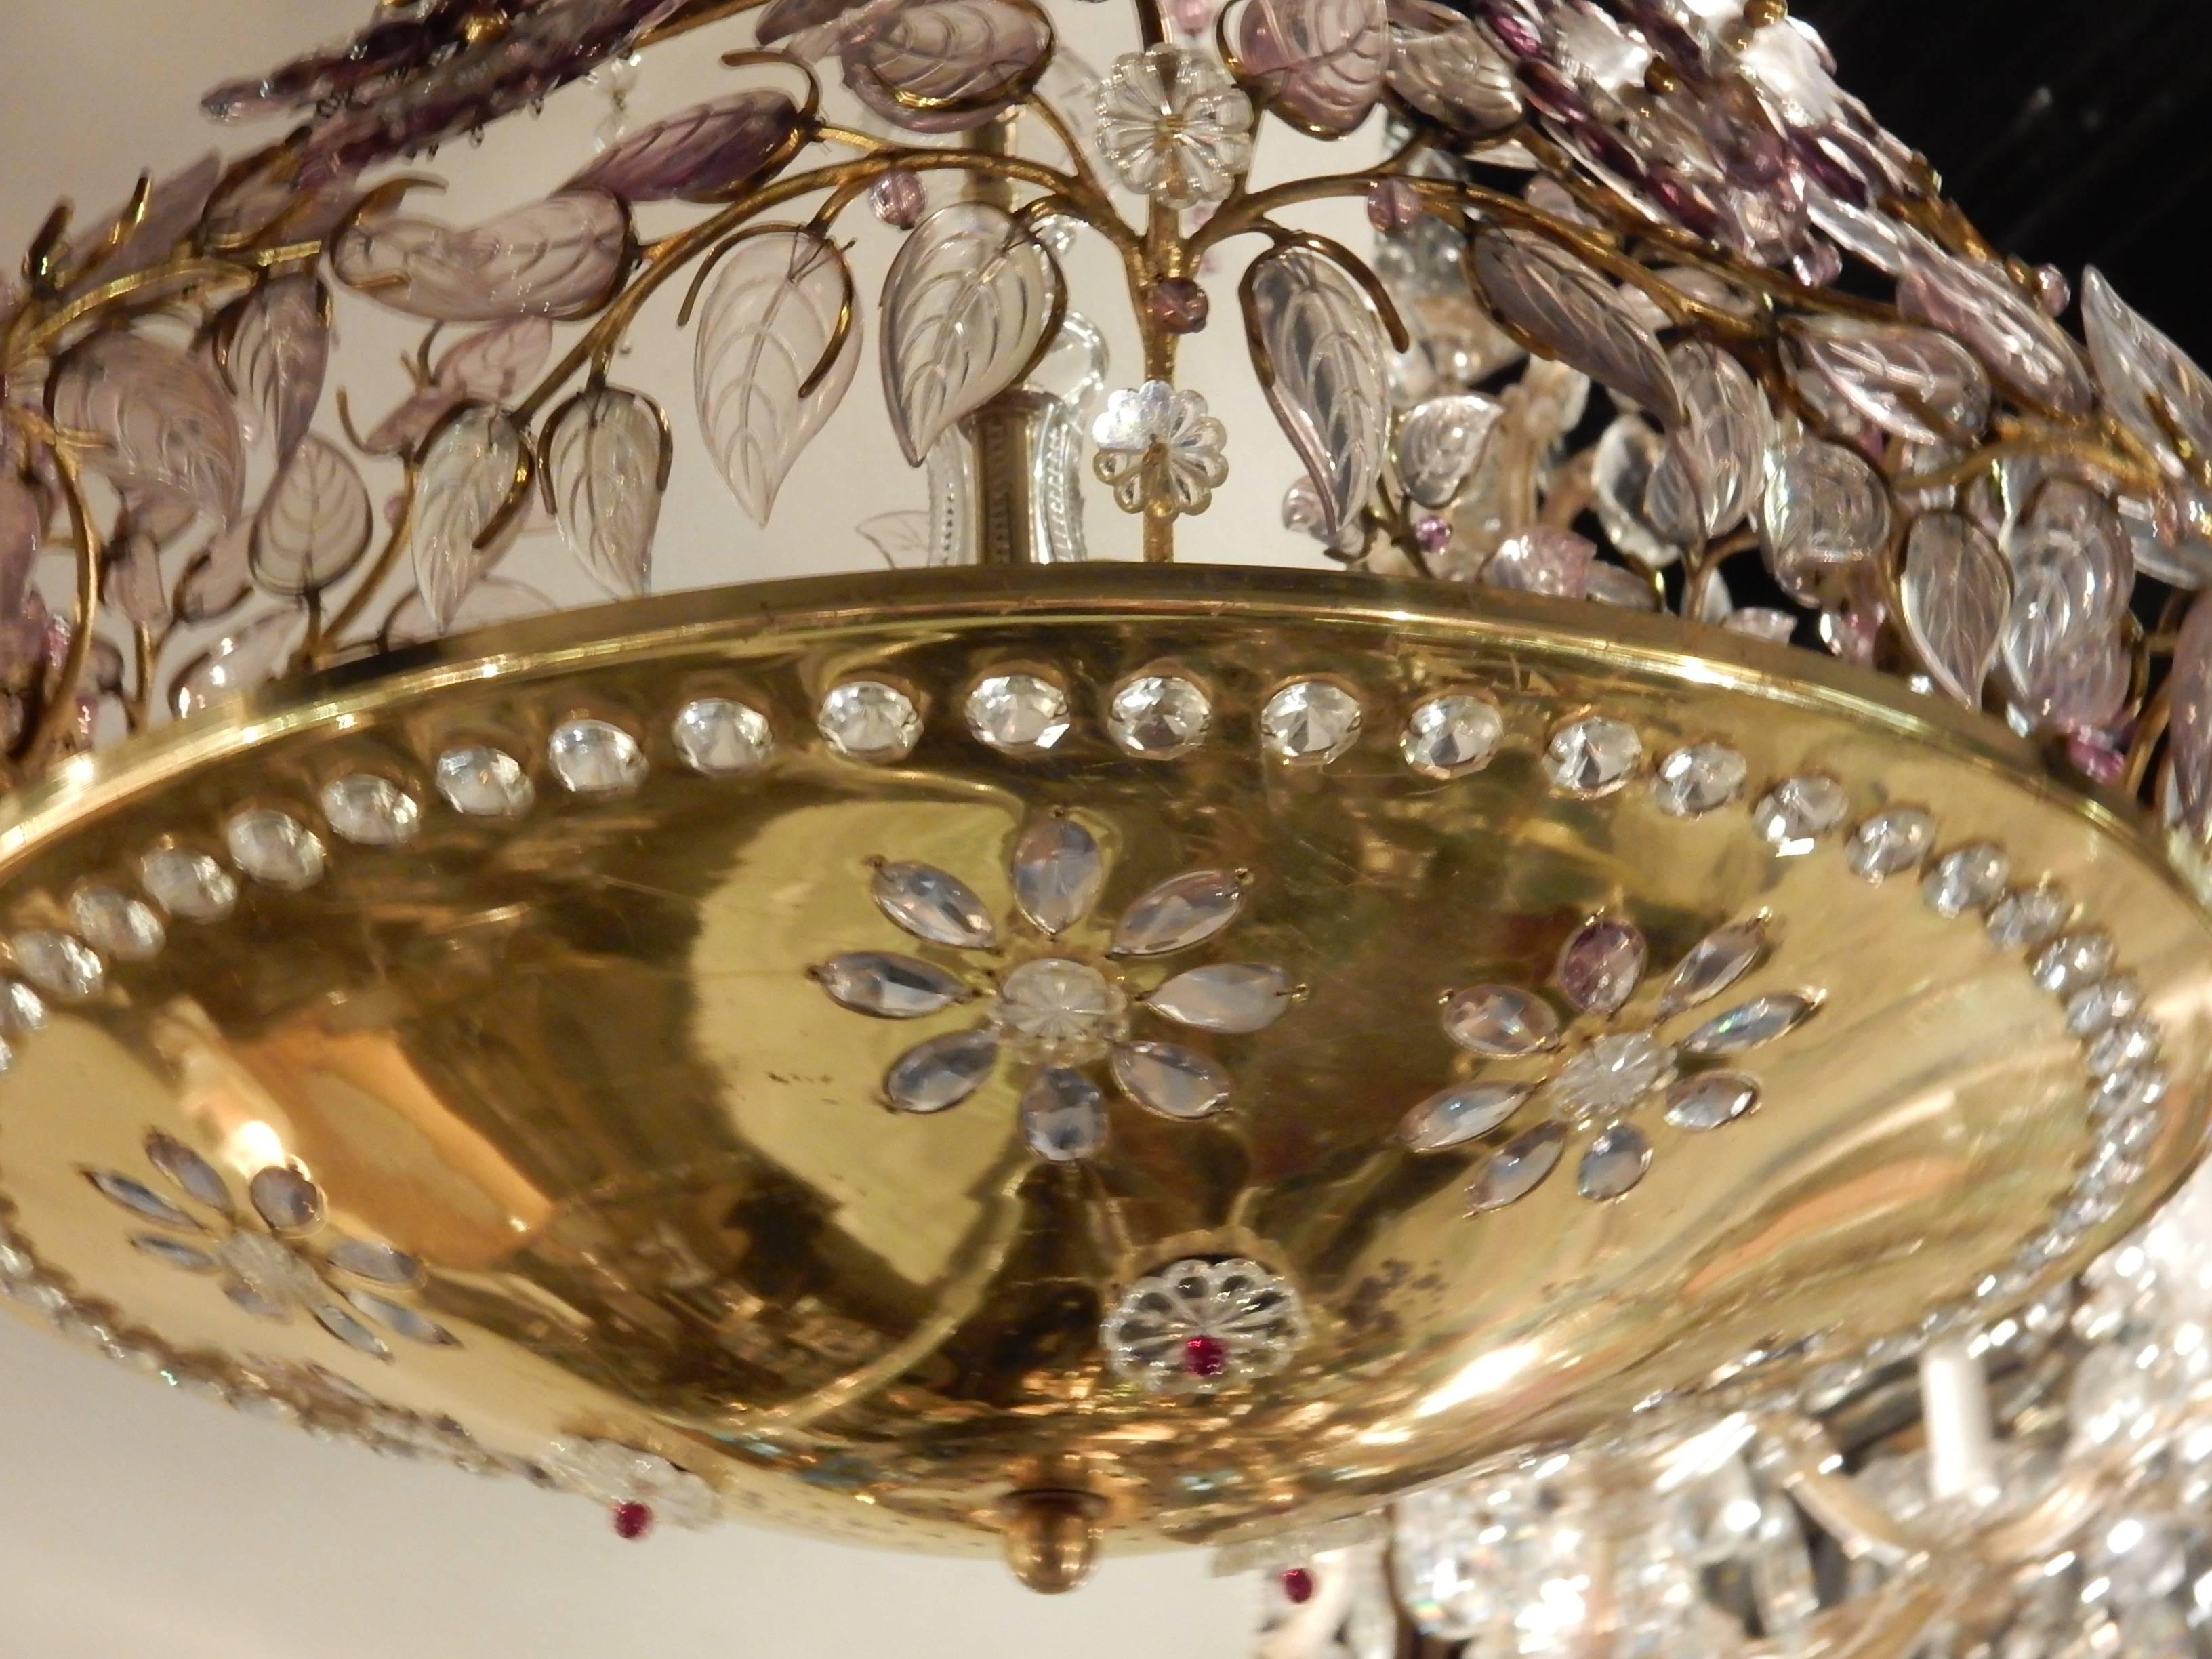 Chandelier, six bulbs, flowers and leaves in glass or kristal colored or crystal, cup in brass
Good condition, circa 1970.